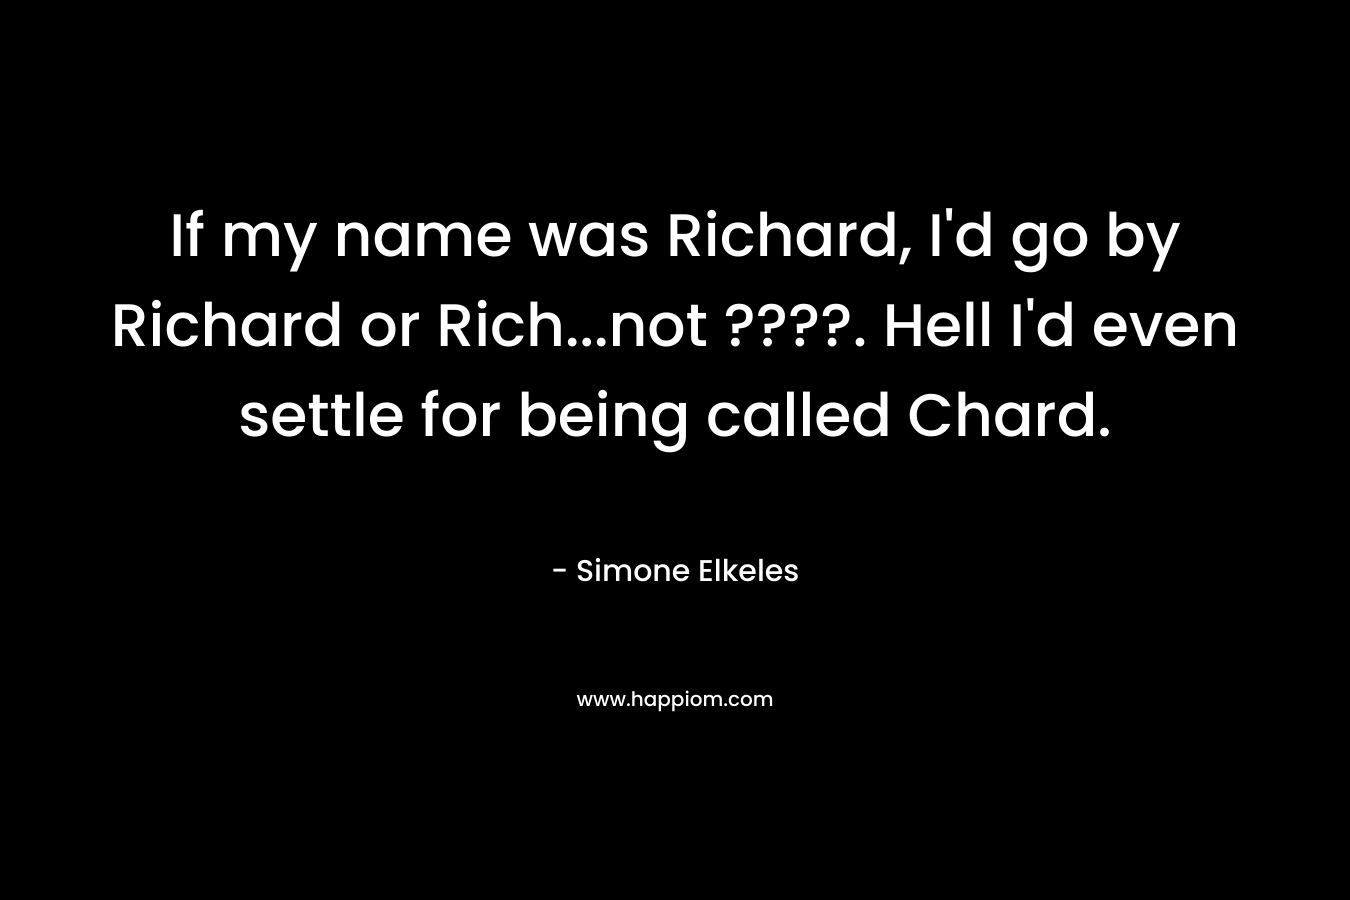 If my name was Richard, I'd go by Richard or Rich...not ????. Hell I'd even settle for being called Chard.